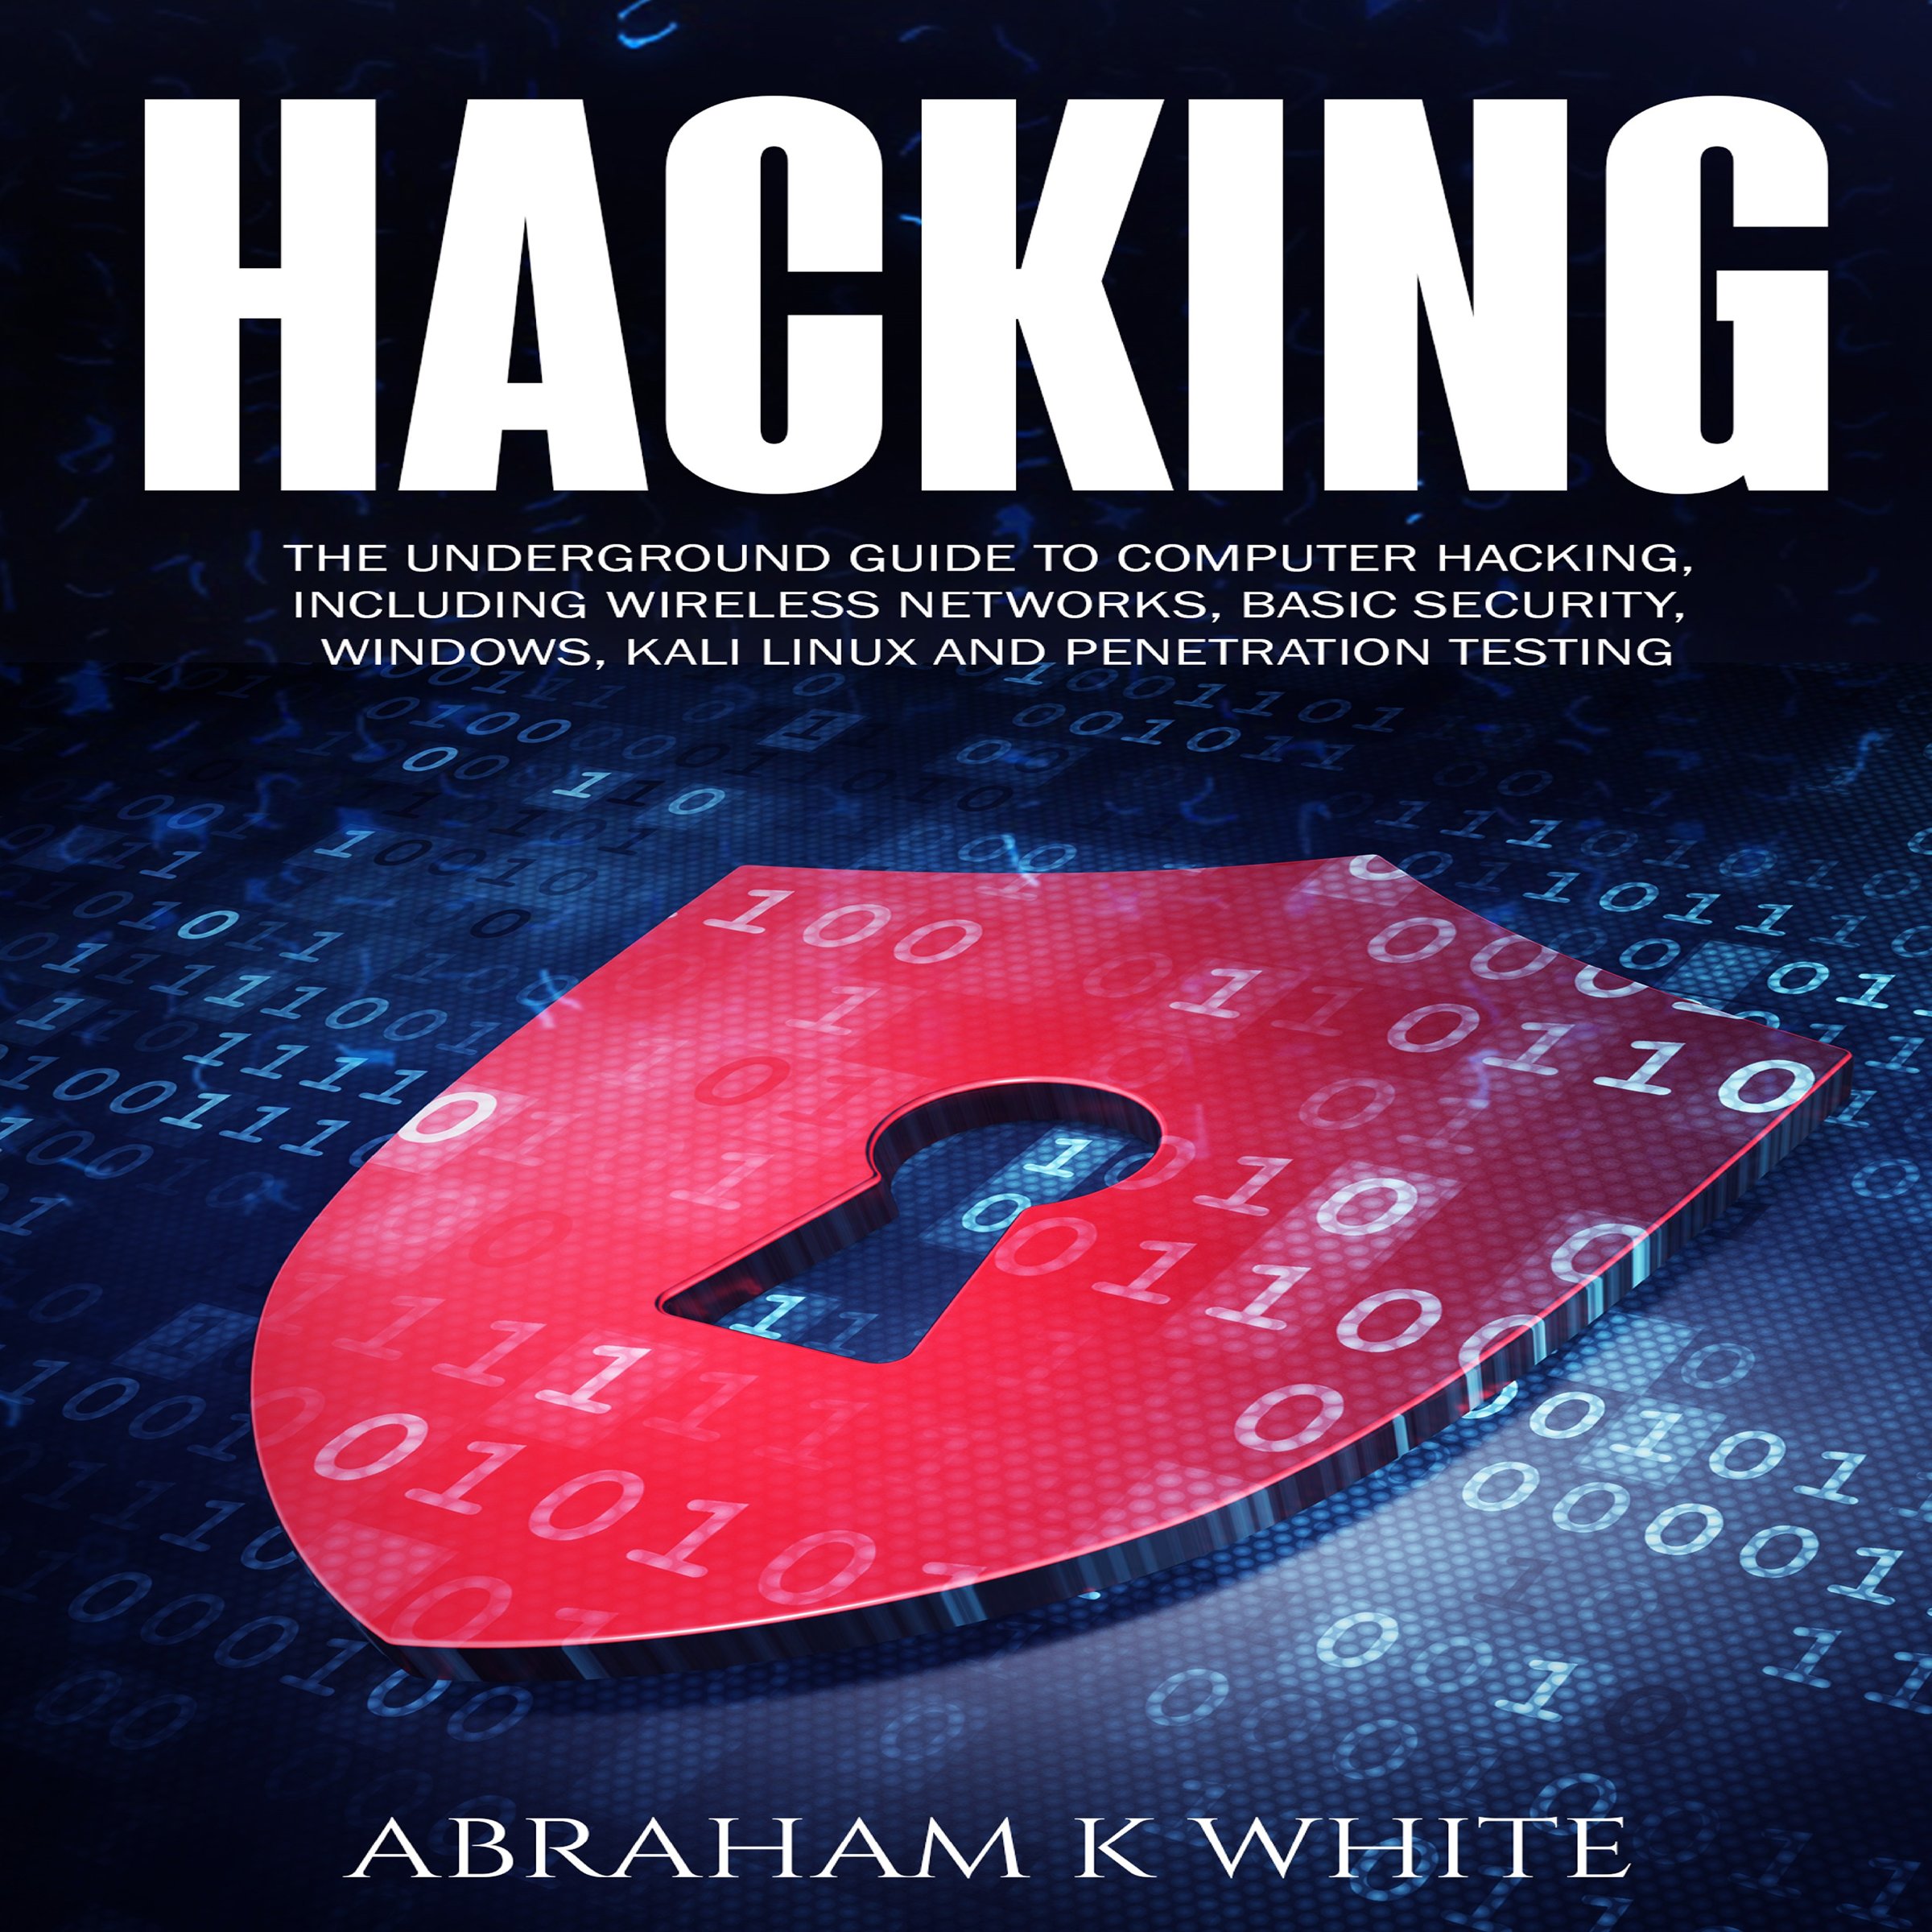 Hacking: The Underground Guide to Computer Hacking, Including Wireless Networks, Security, Windows, Kali Linux, and Penetration Testing